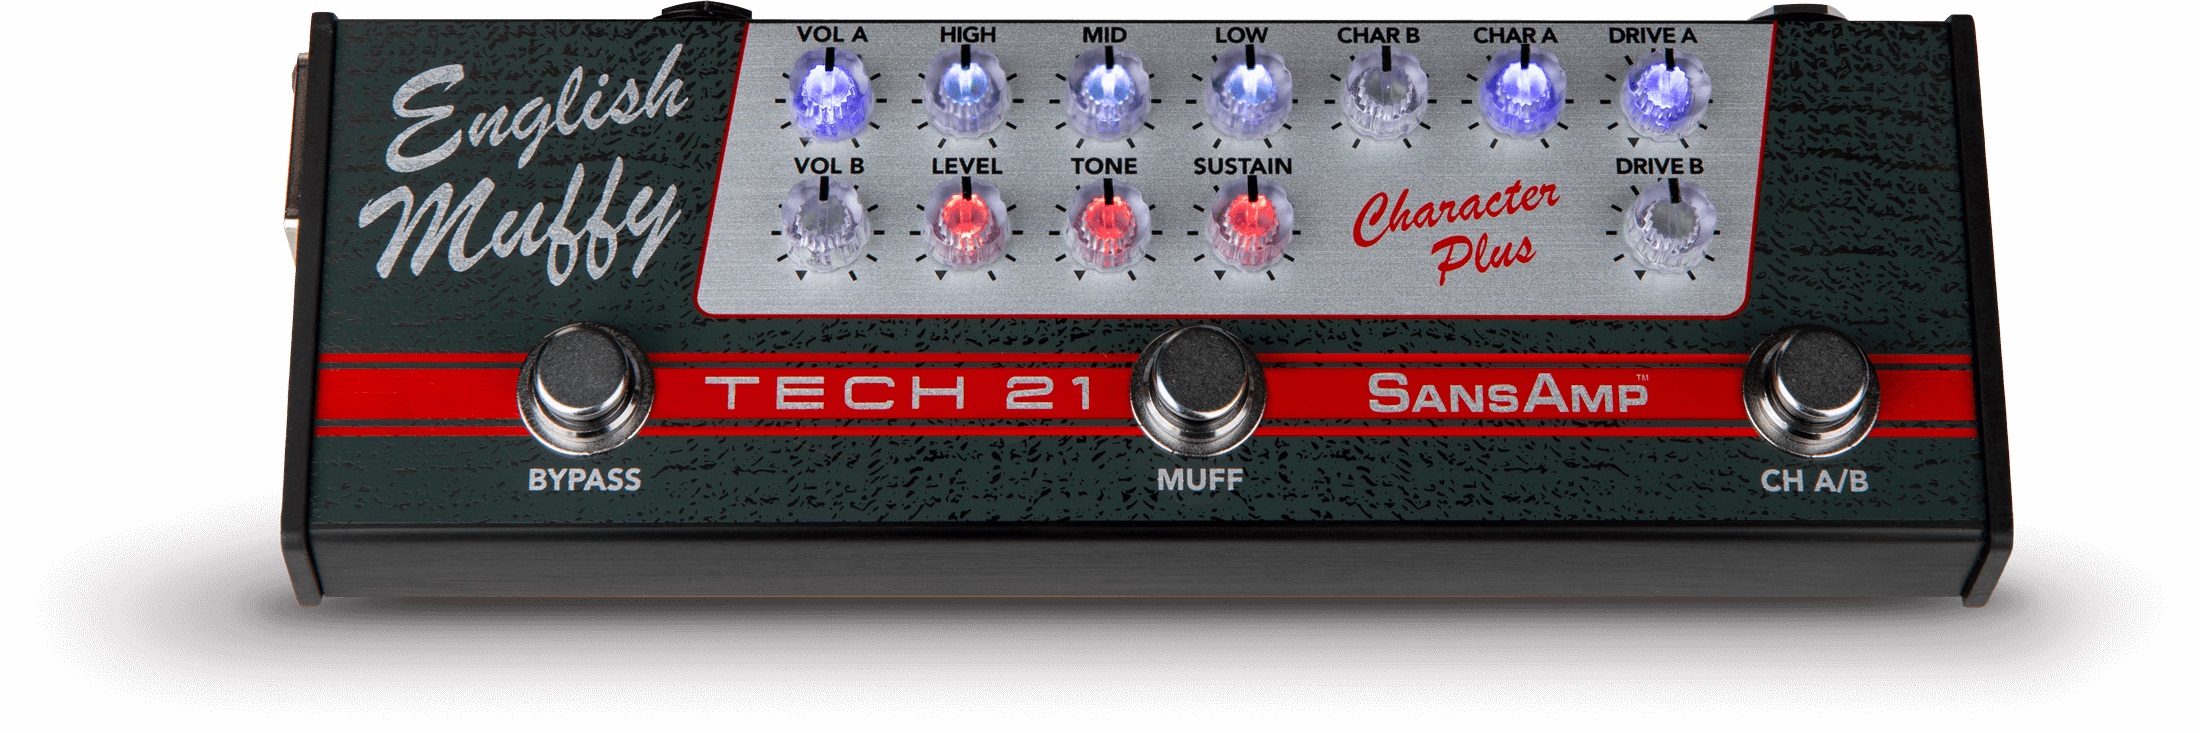 Tech 21 English Muffy Character Series - Guitar amp modeling simulation - Variation 1